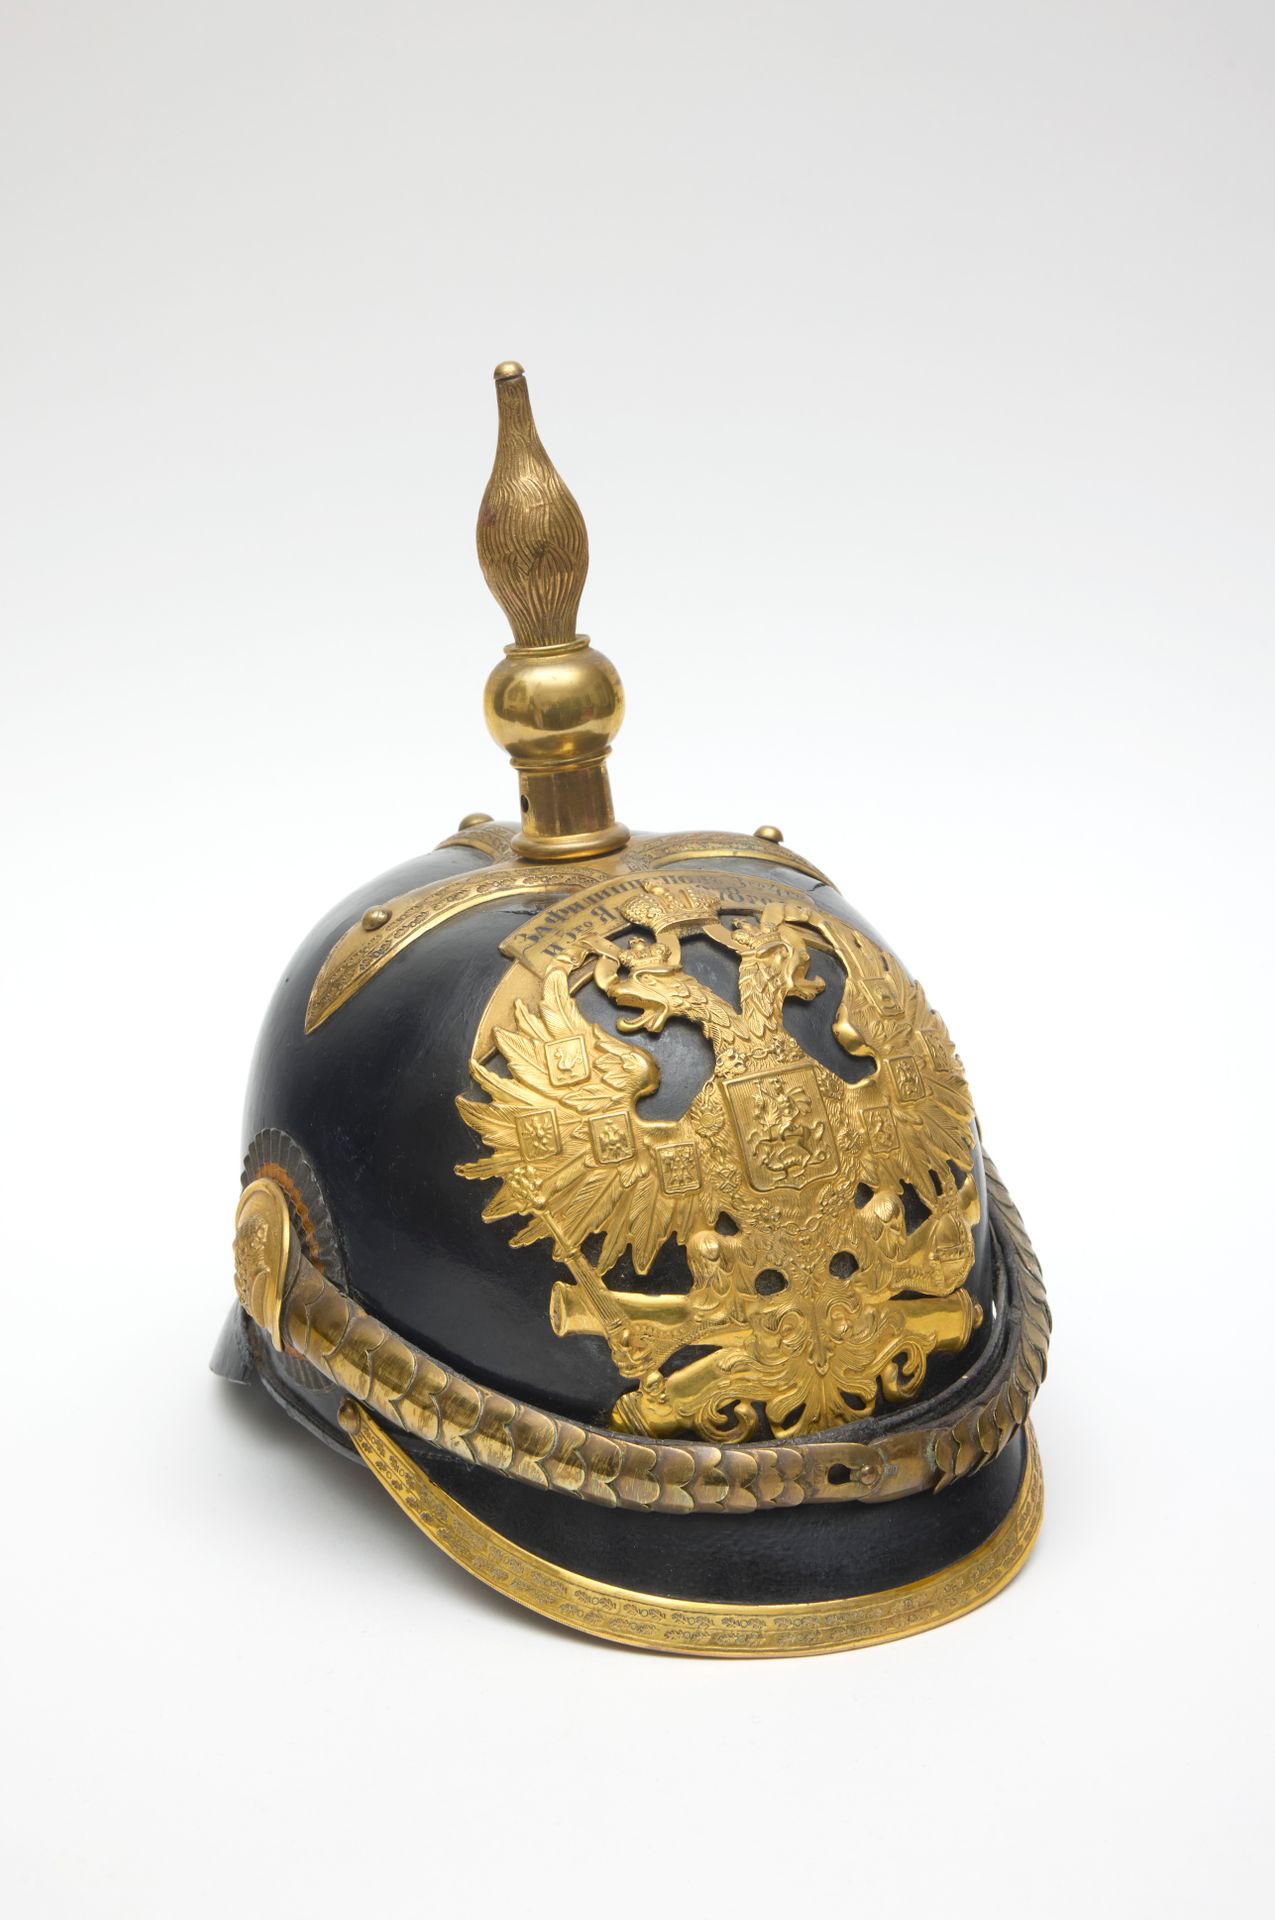 Null Pointed helmet of an artillery general, Guards division.
Decorated with an &hellip;